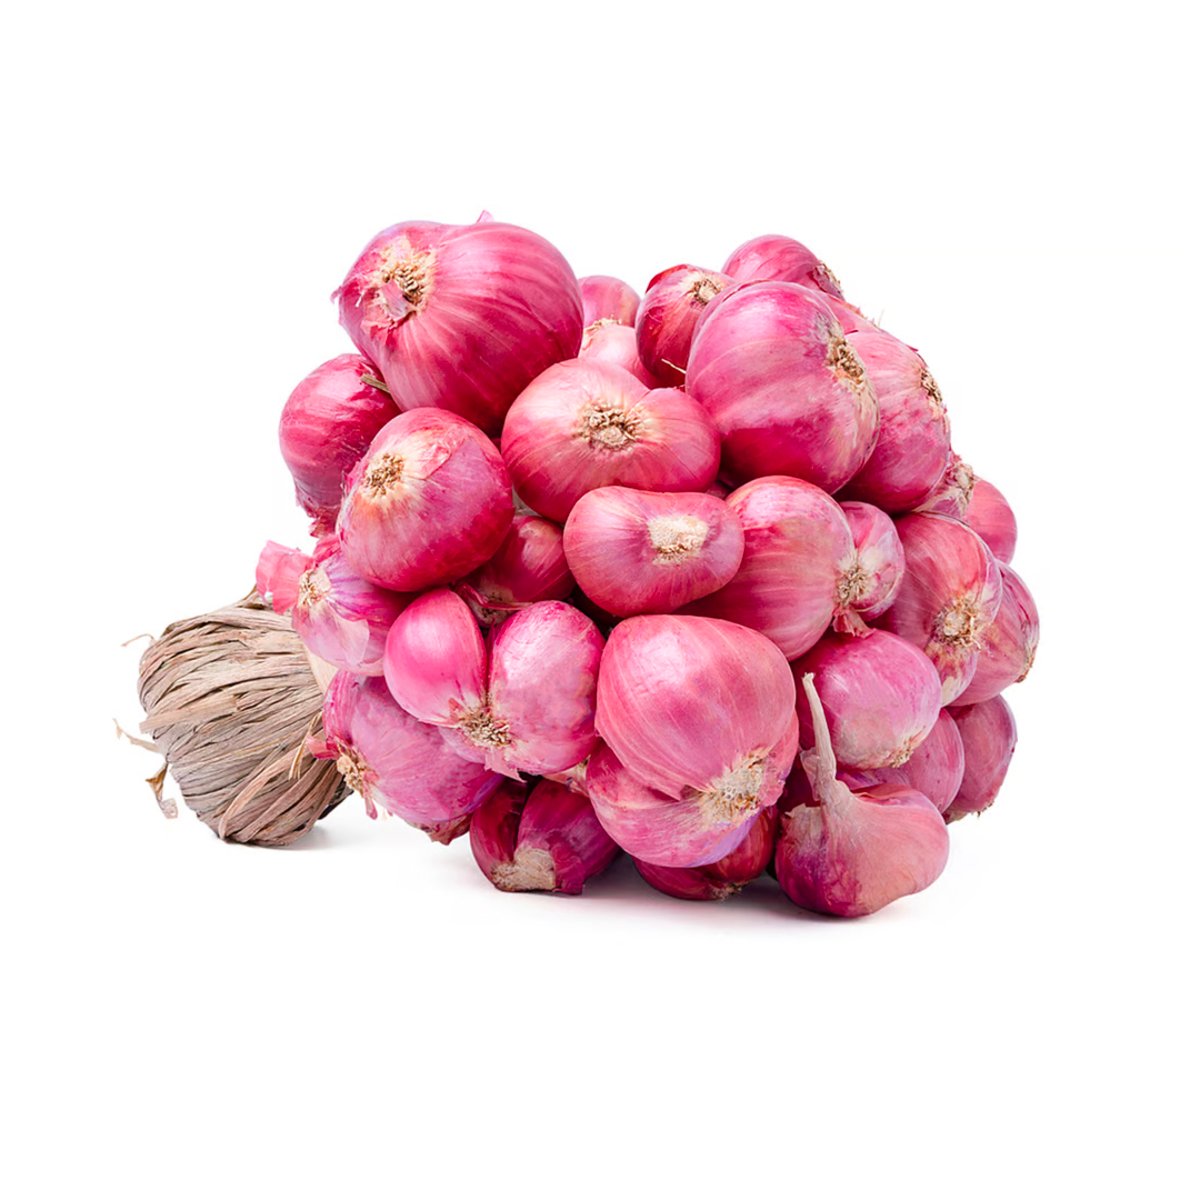 Onion Thai Shallot 500g Approx Weight